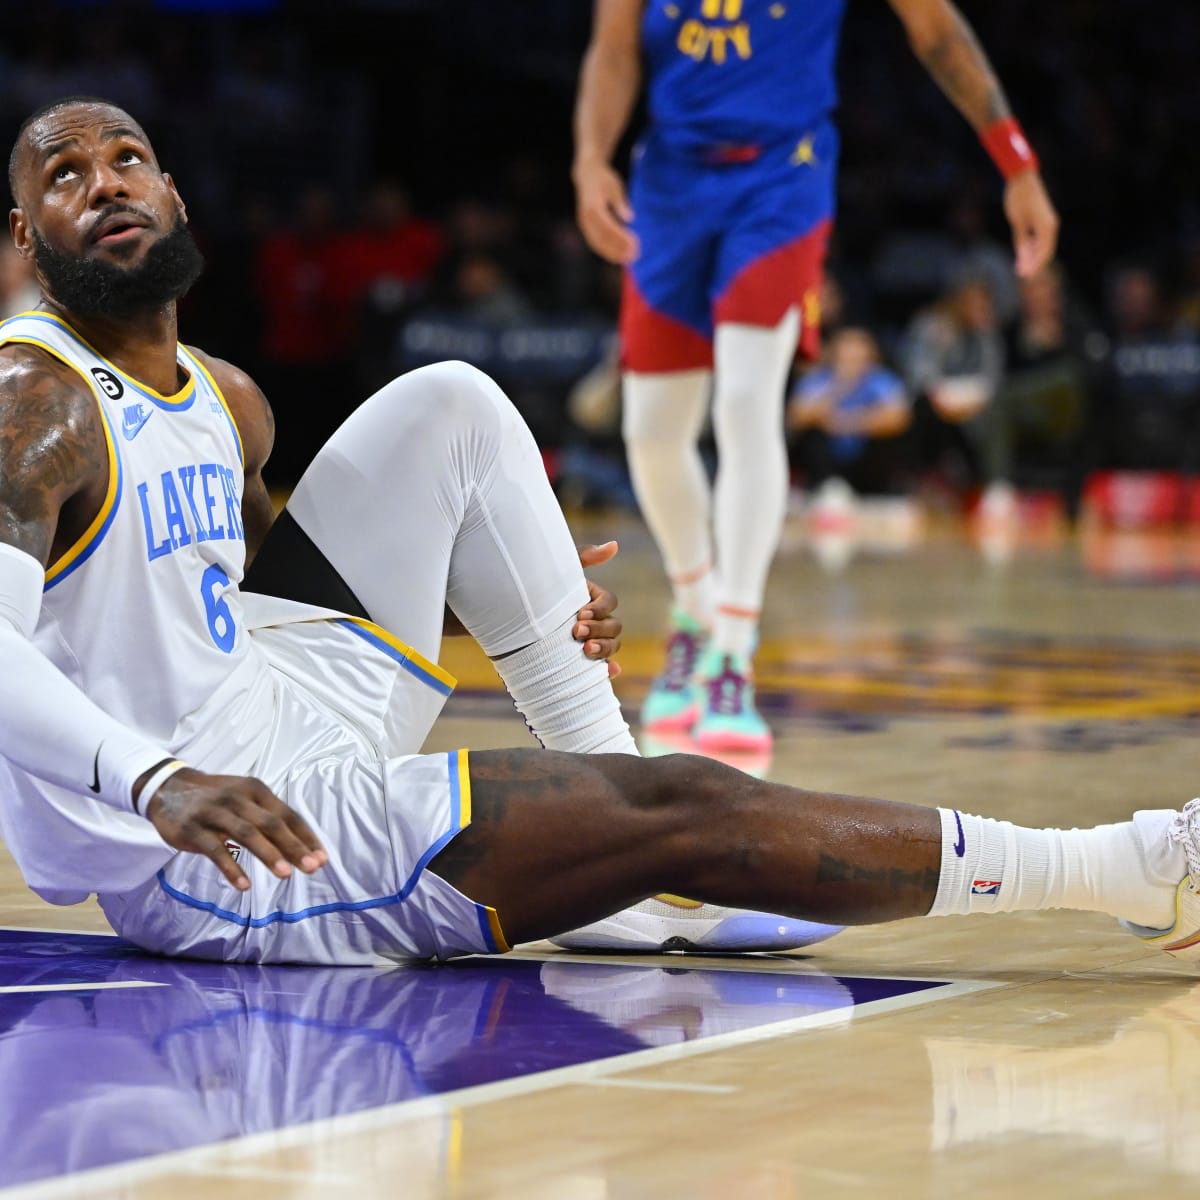 LeBron James injury update: Lakers Star will play Monday vs. Trail